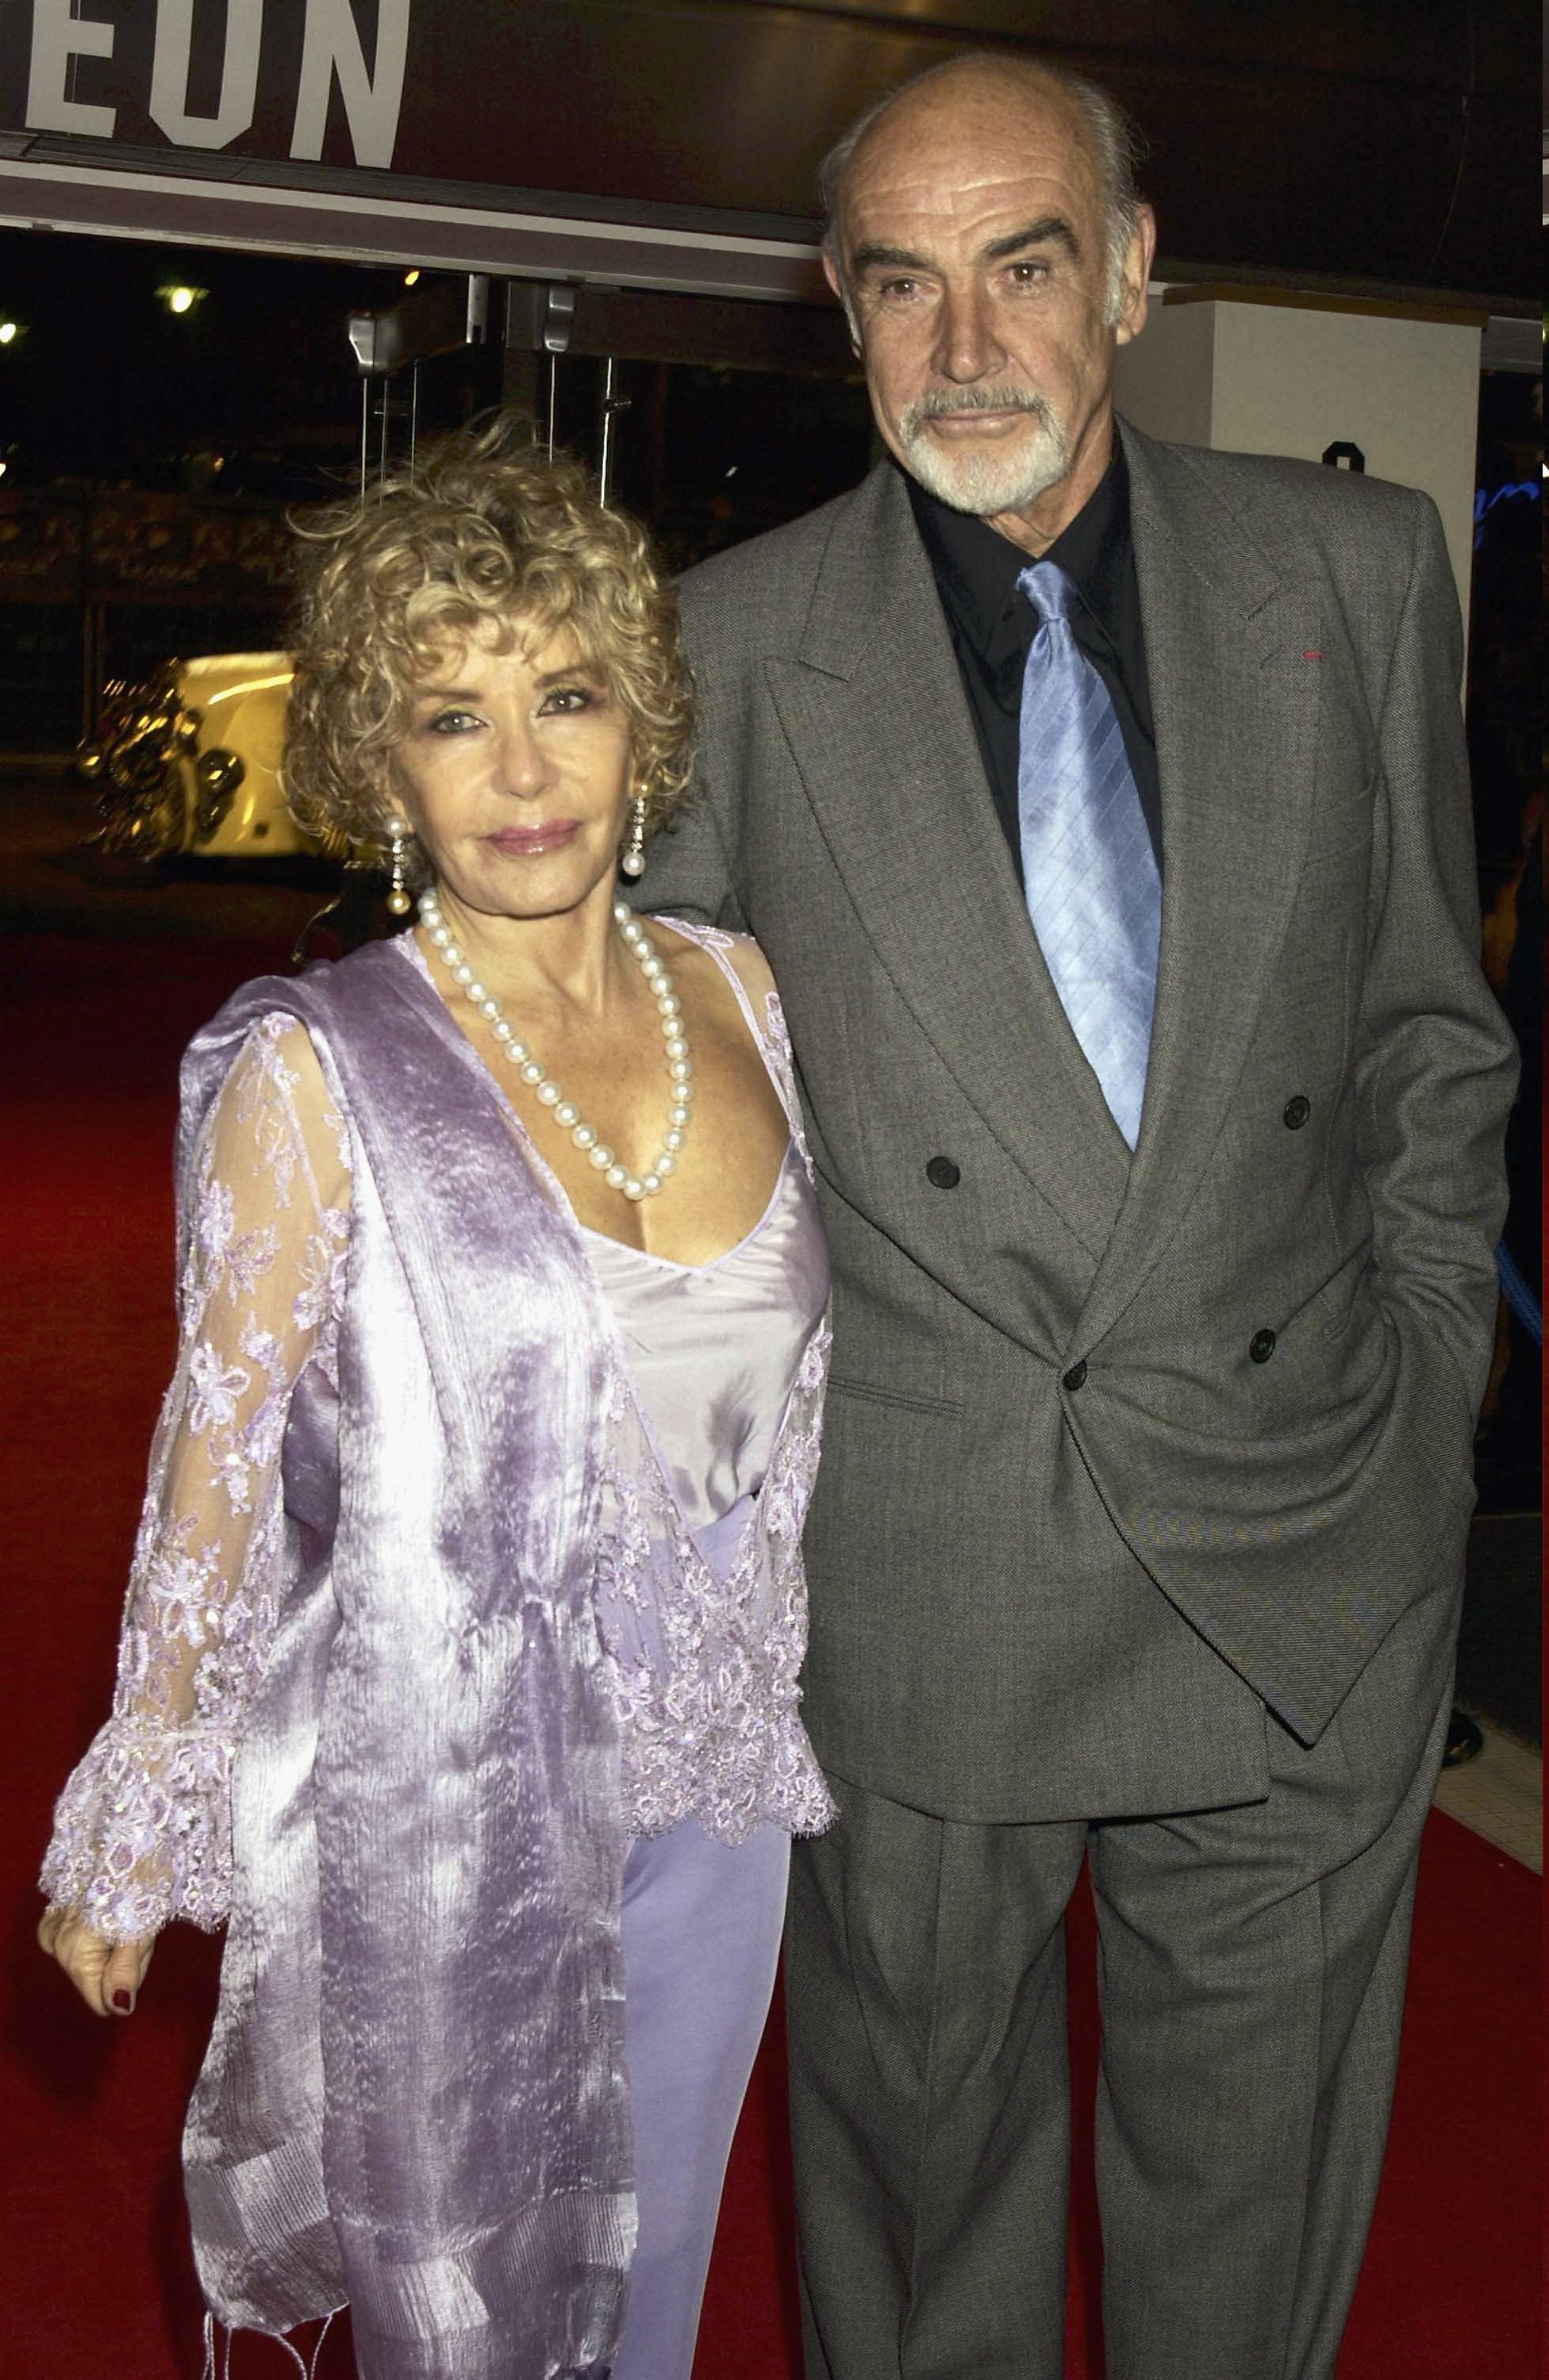 Sean Connery and Micheline attend the premiere of his film "The League of Extraordinary Gentlemen" at the Odeon Cinema on September 29, 2003, in Leicester Square, London. | Source: Getty Images